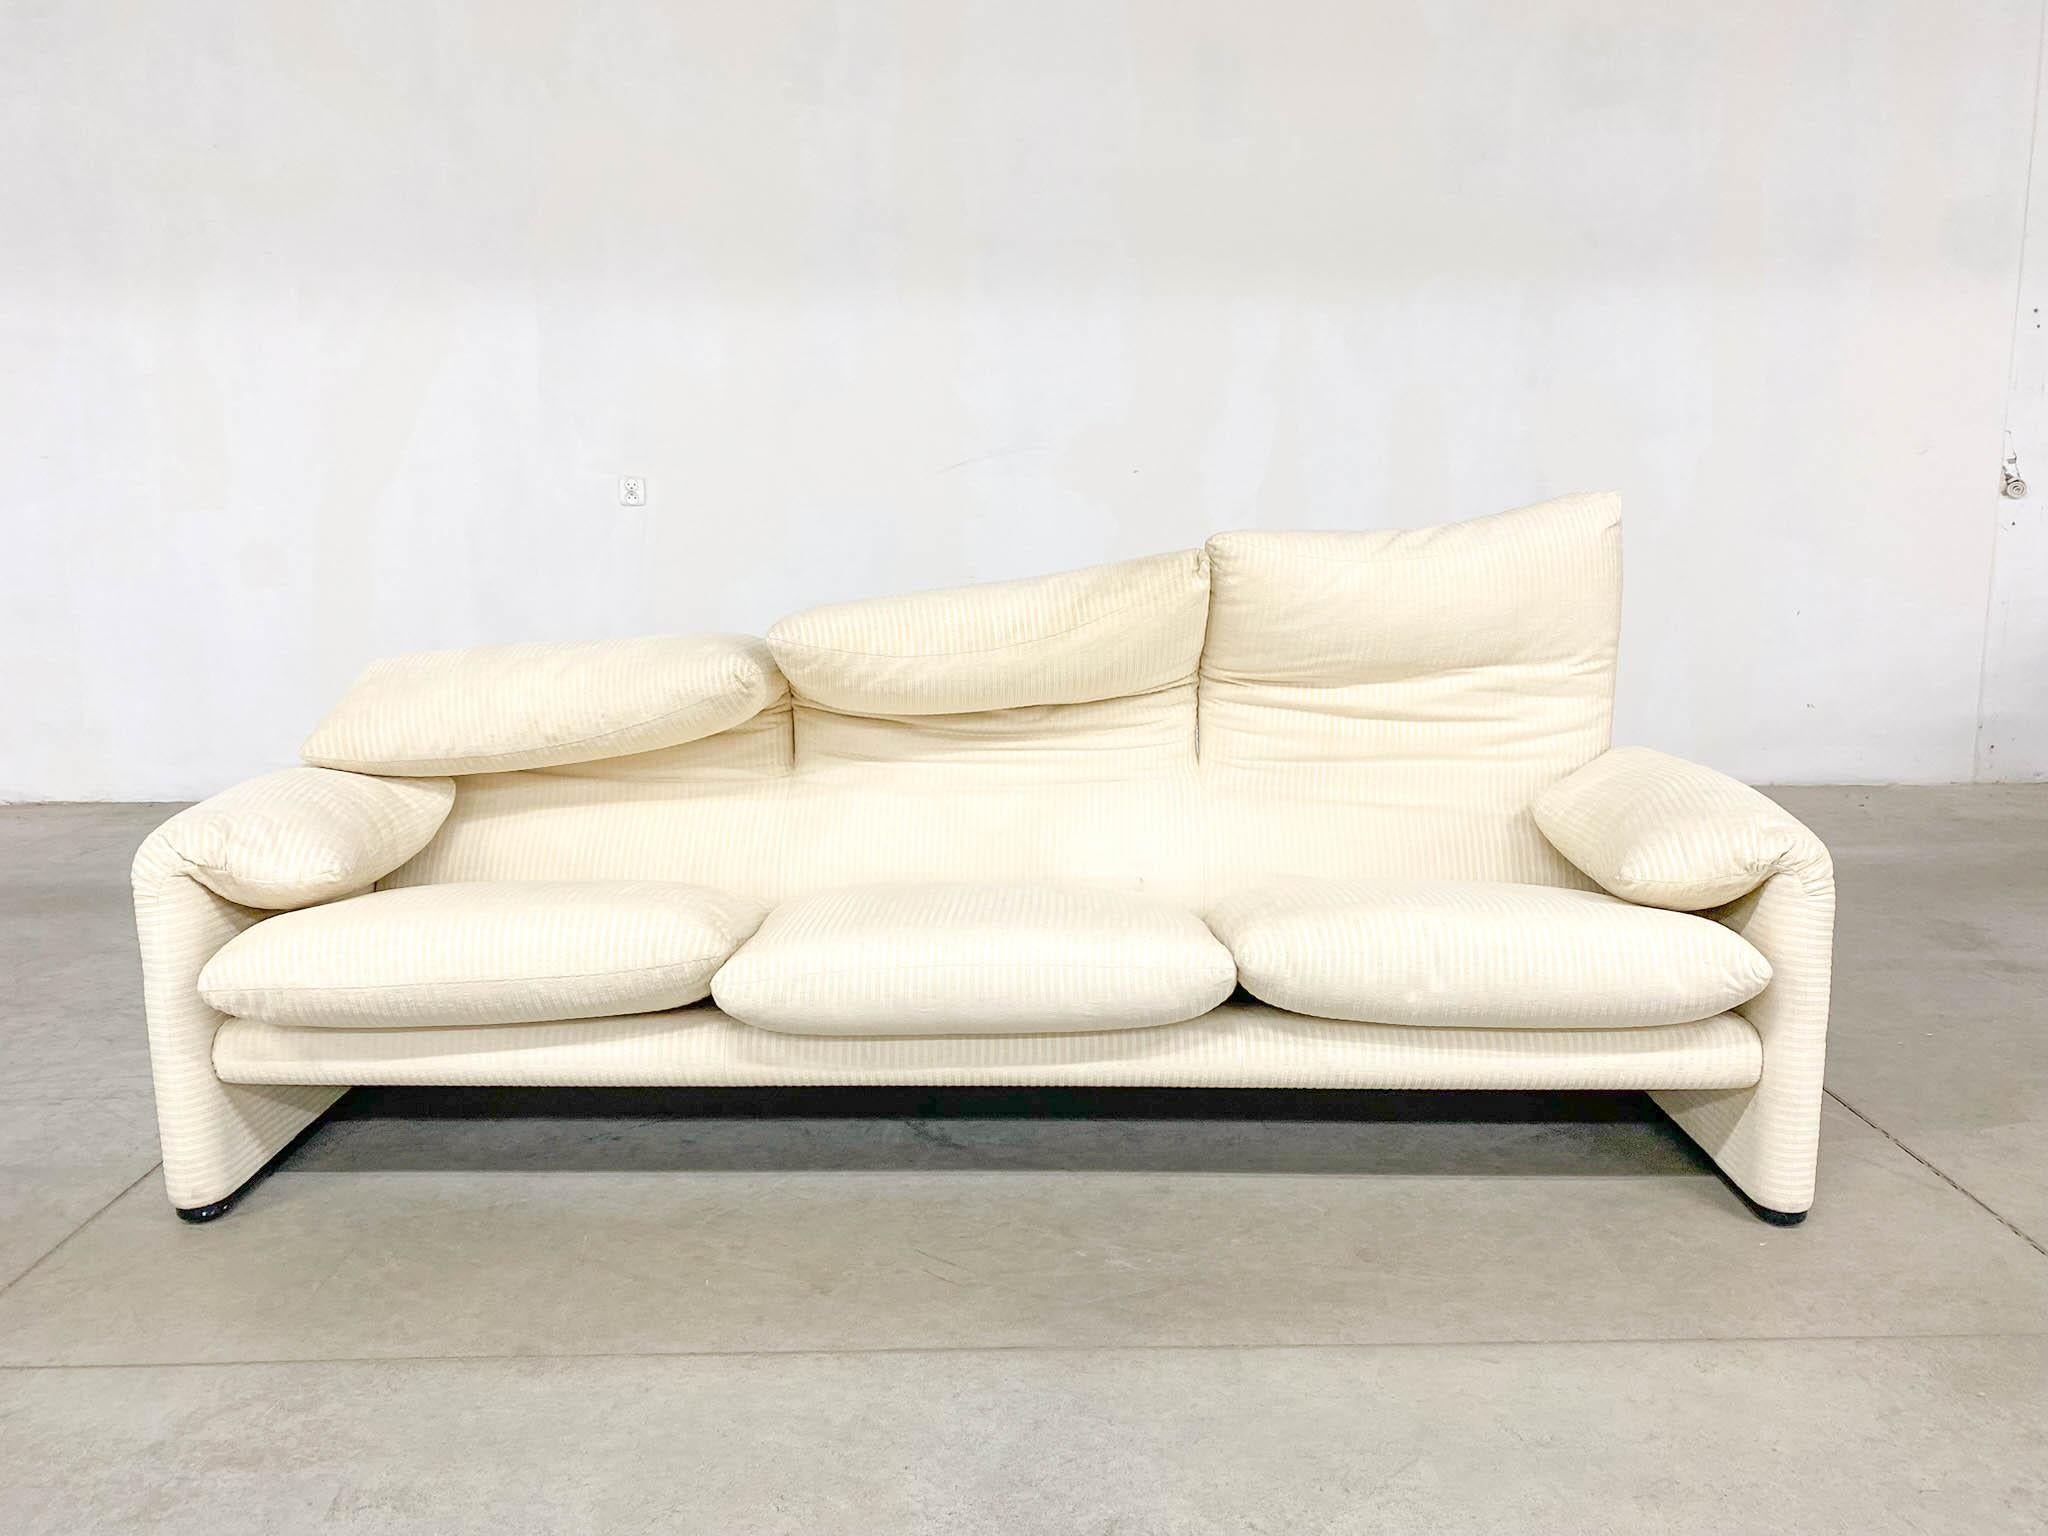 Mid-Century Modern Maralunga 3-Seater Sofa by Vico Magistretti for Cassina, 1990s For Sale